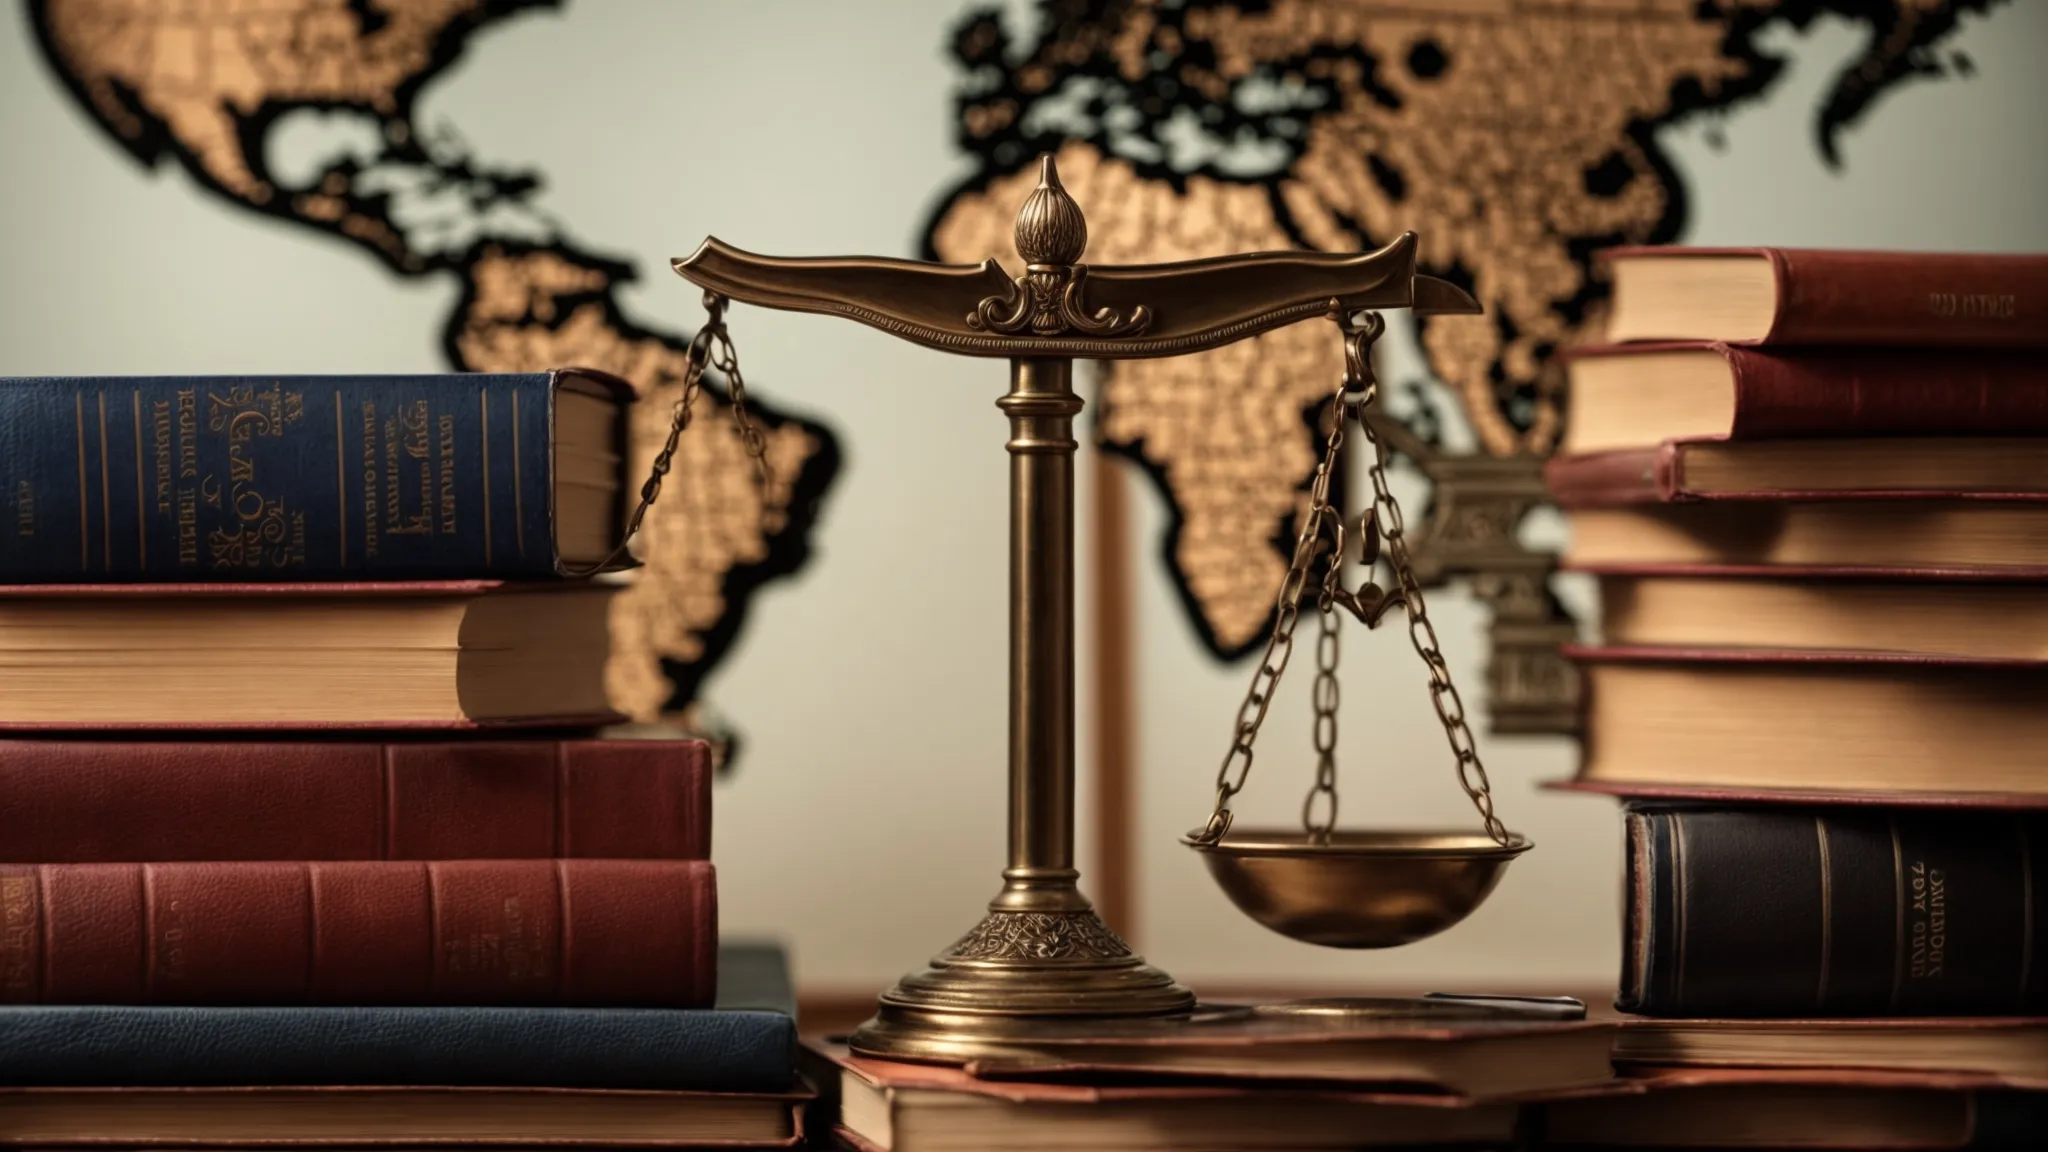 a scale of justice balances atop a stack of various international legal books against a backdrop of a world map.